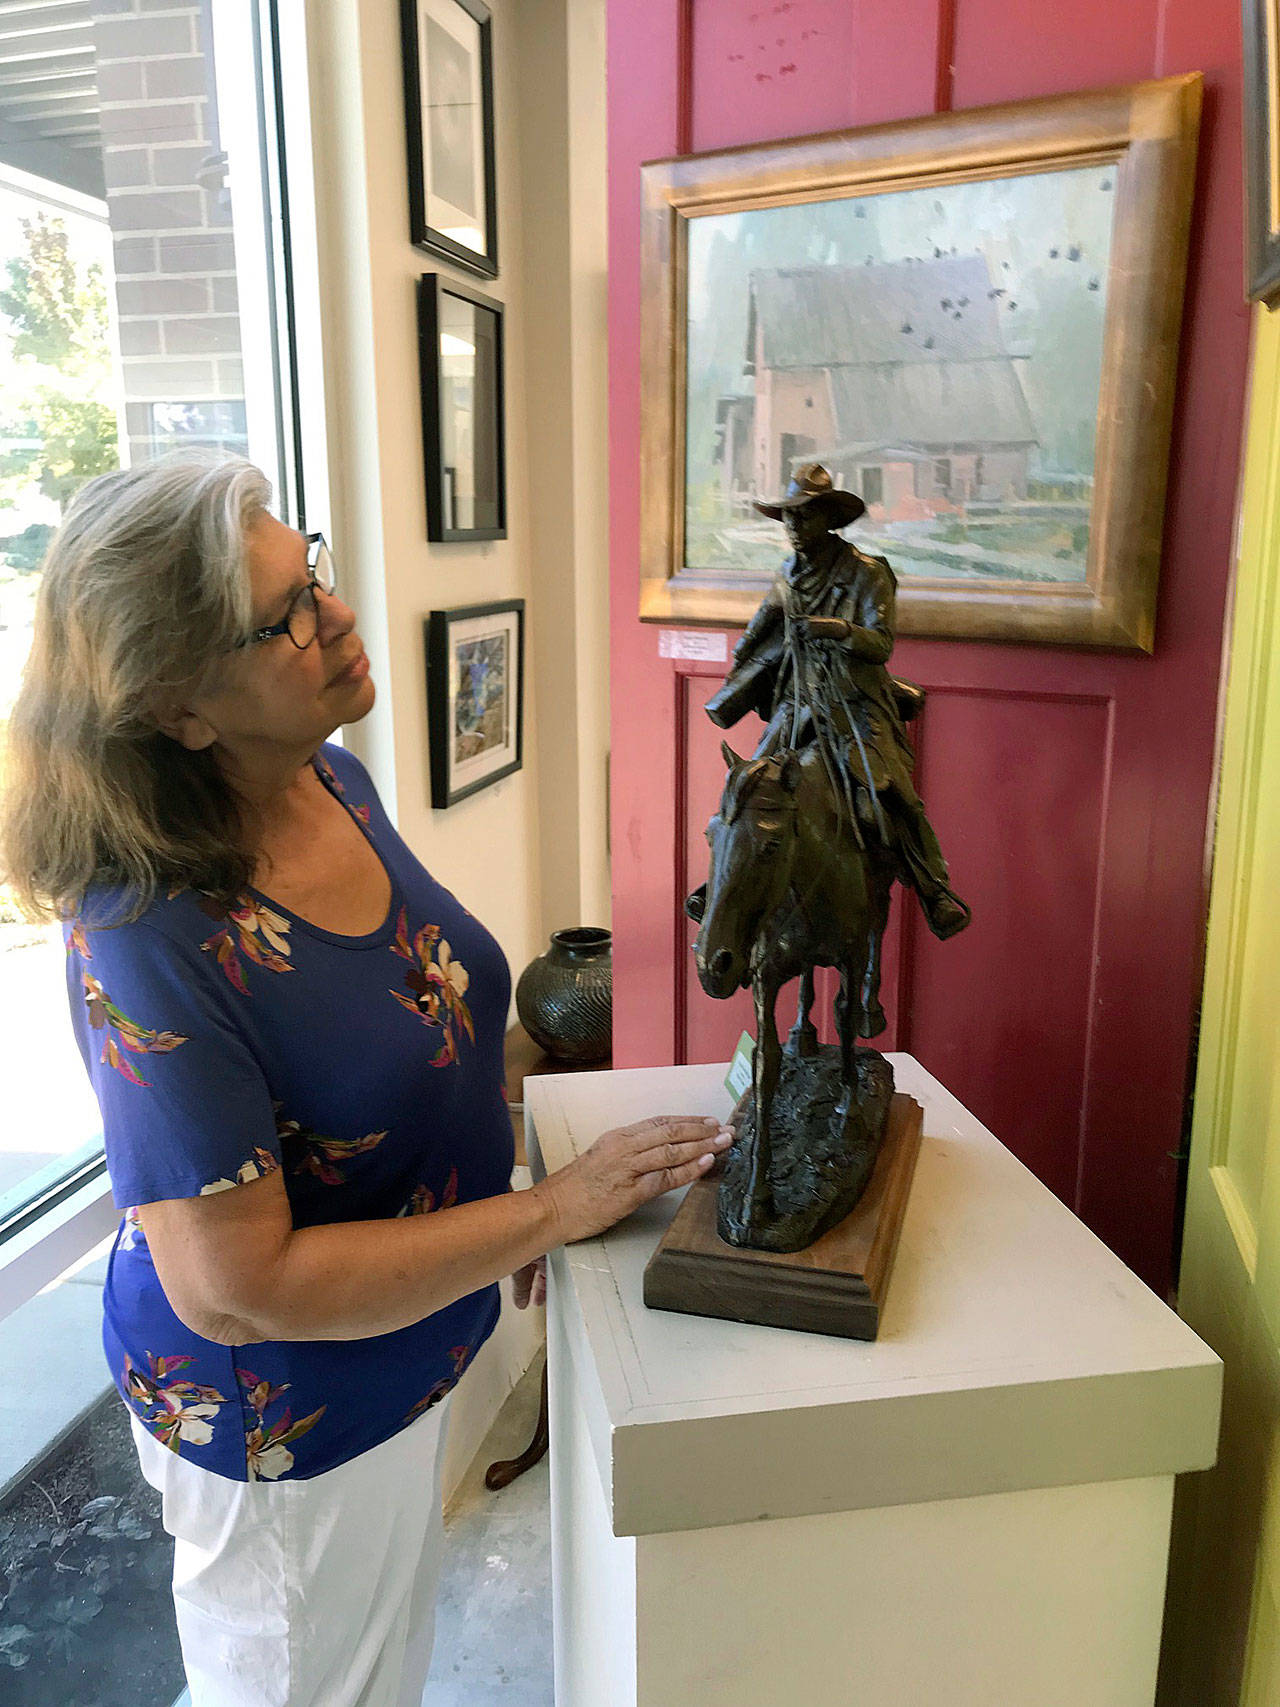 Charlotte Gollnick, a member of Auburn Valley Creative Arts, takes in some of the local works on display at the group’s recently-opened “pop-up” gallery at The Villas at Auburn, a new apartment complex. MARK KLAAS, Auburn Reporter